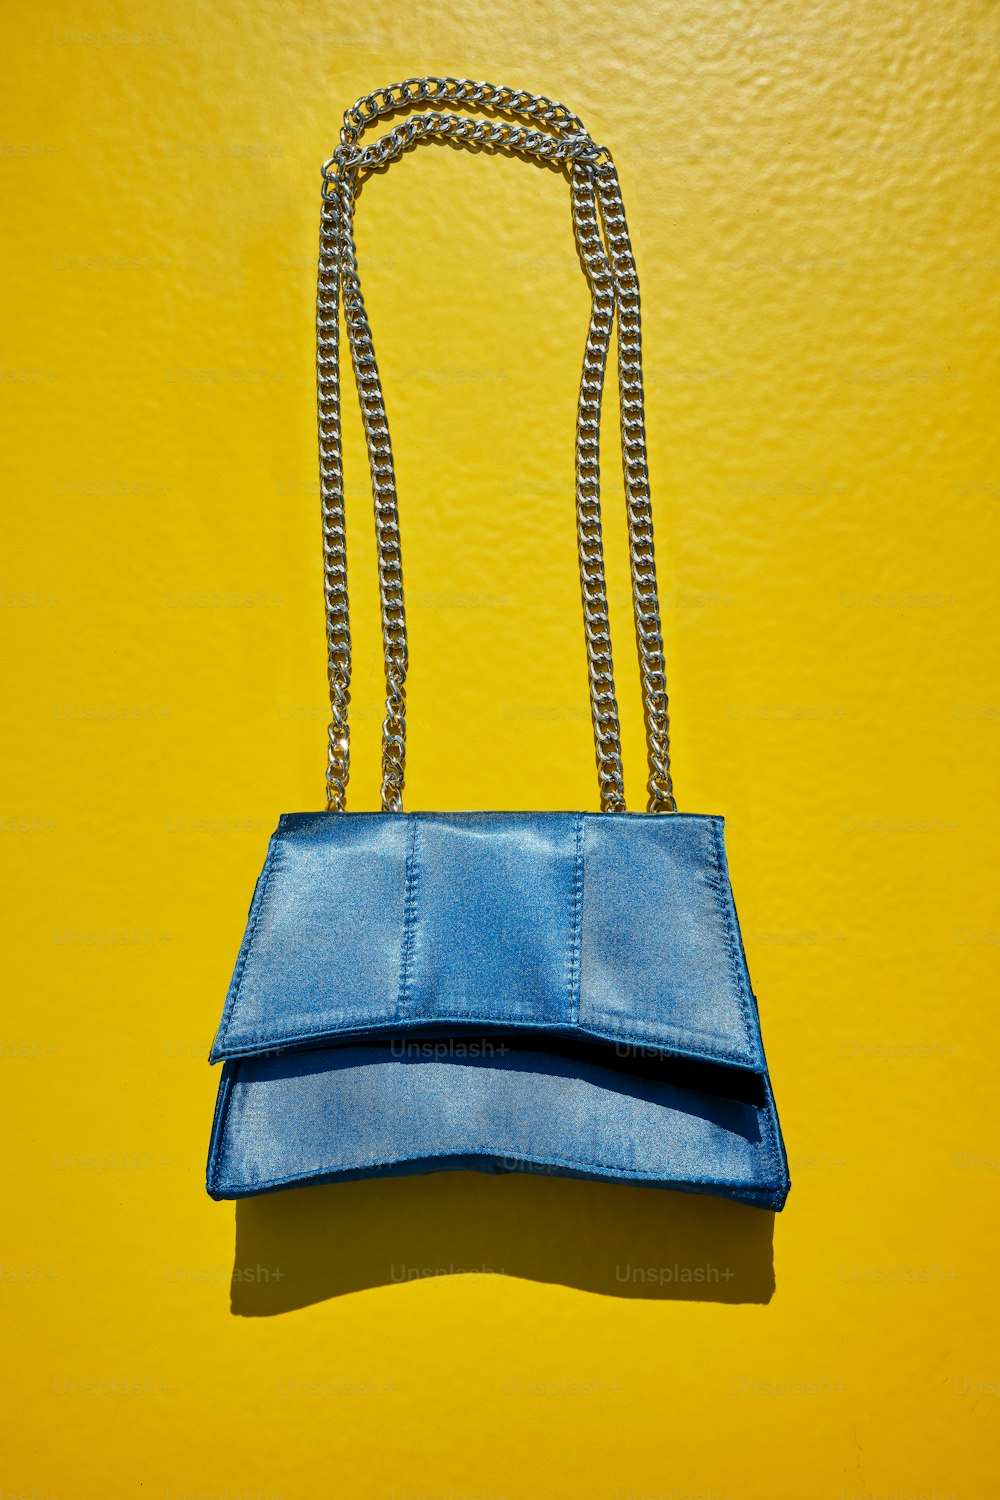 a blue purse hanging on a yellow wall